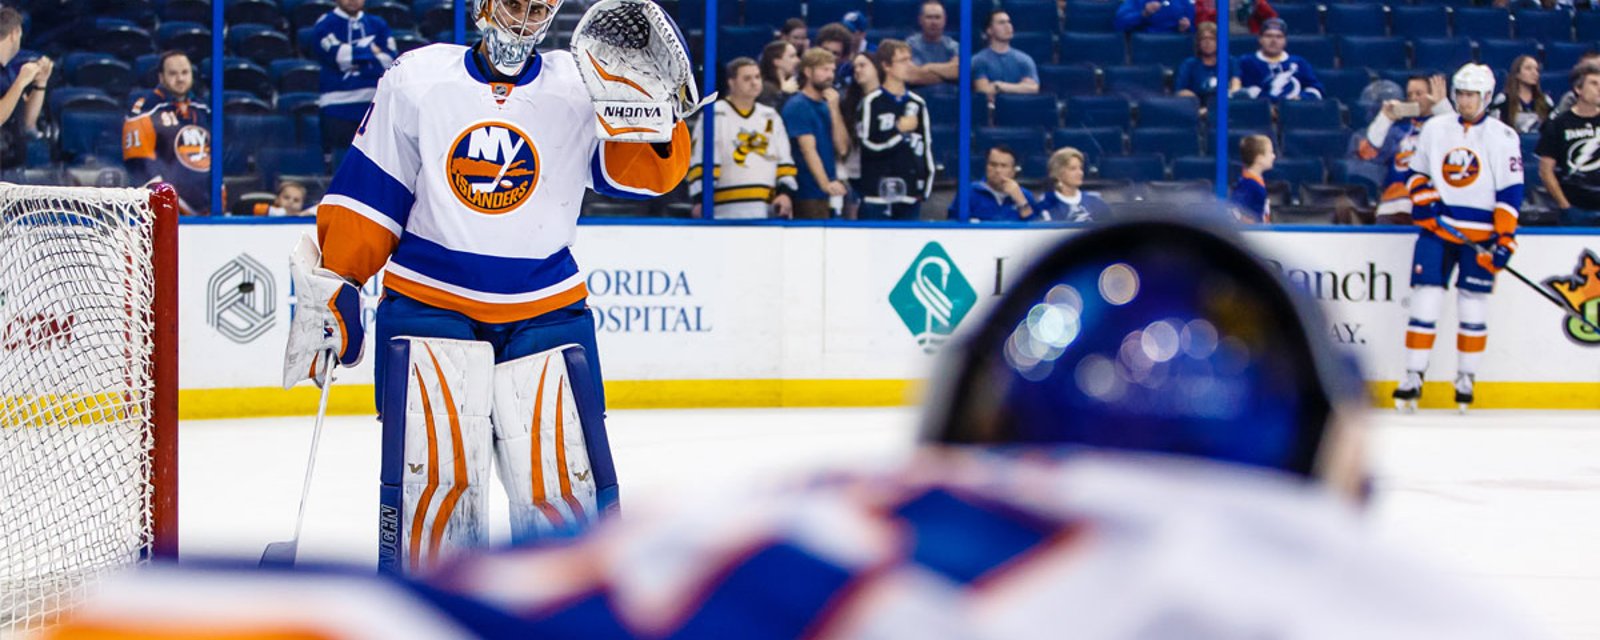 Who is the Isles starting goalie? 